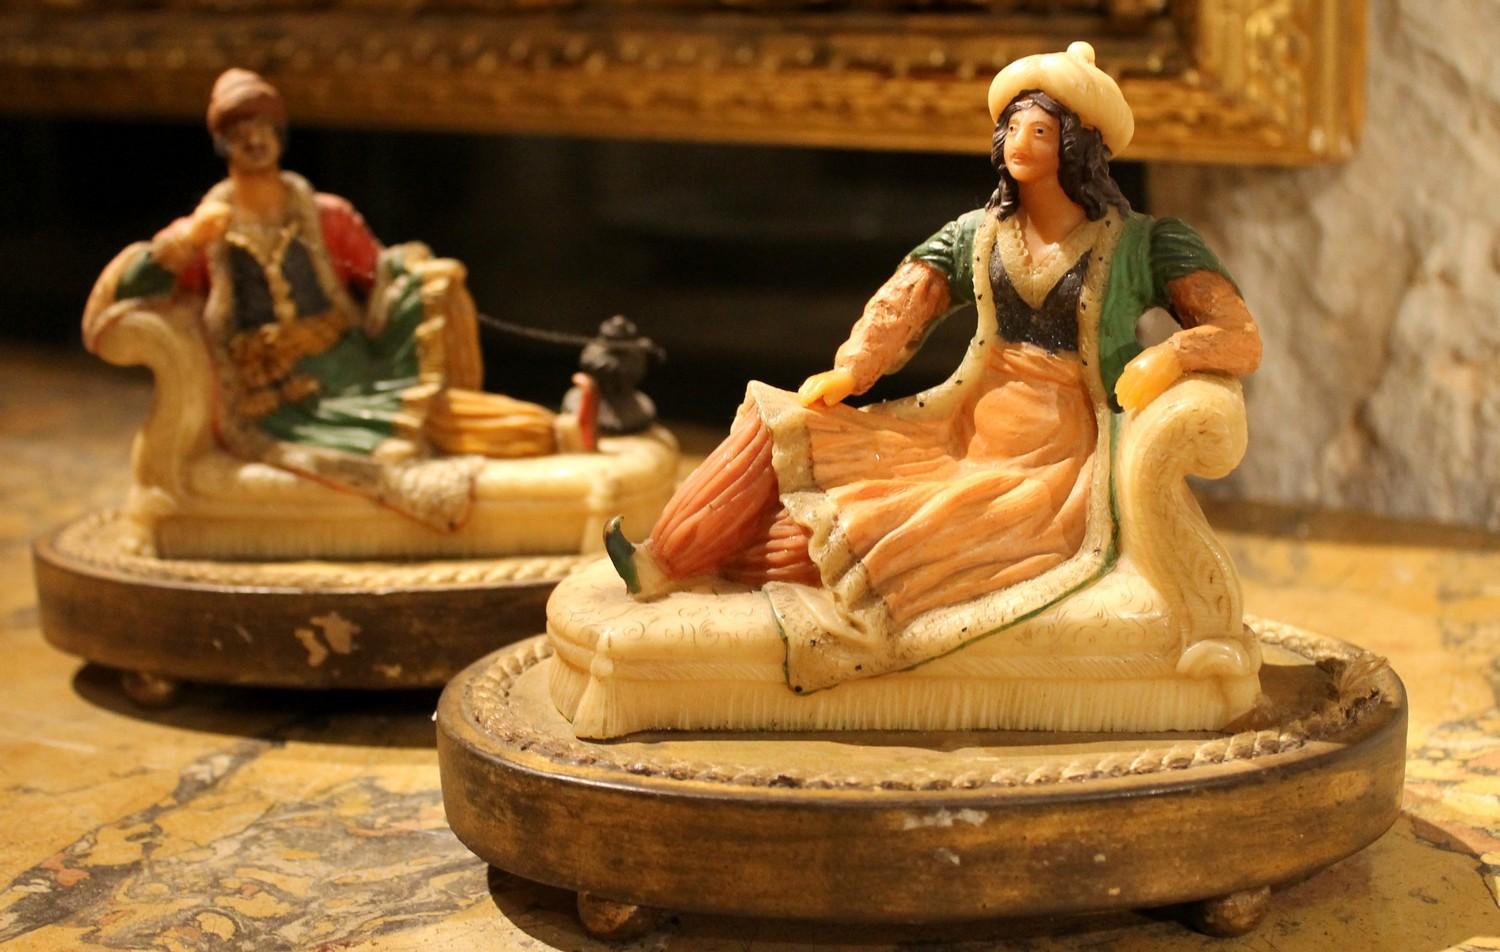 These unusual hand-sculpted polychrome wax figurines on giltwood base depicting two Arabs relaxing on a sofa perfectly captures late 19th century Europe's perspective and aesthetic fascination with Middle Eastern cultures.
These highly decorative